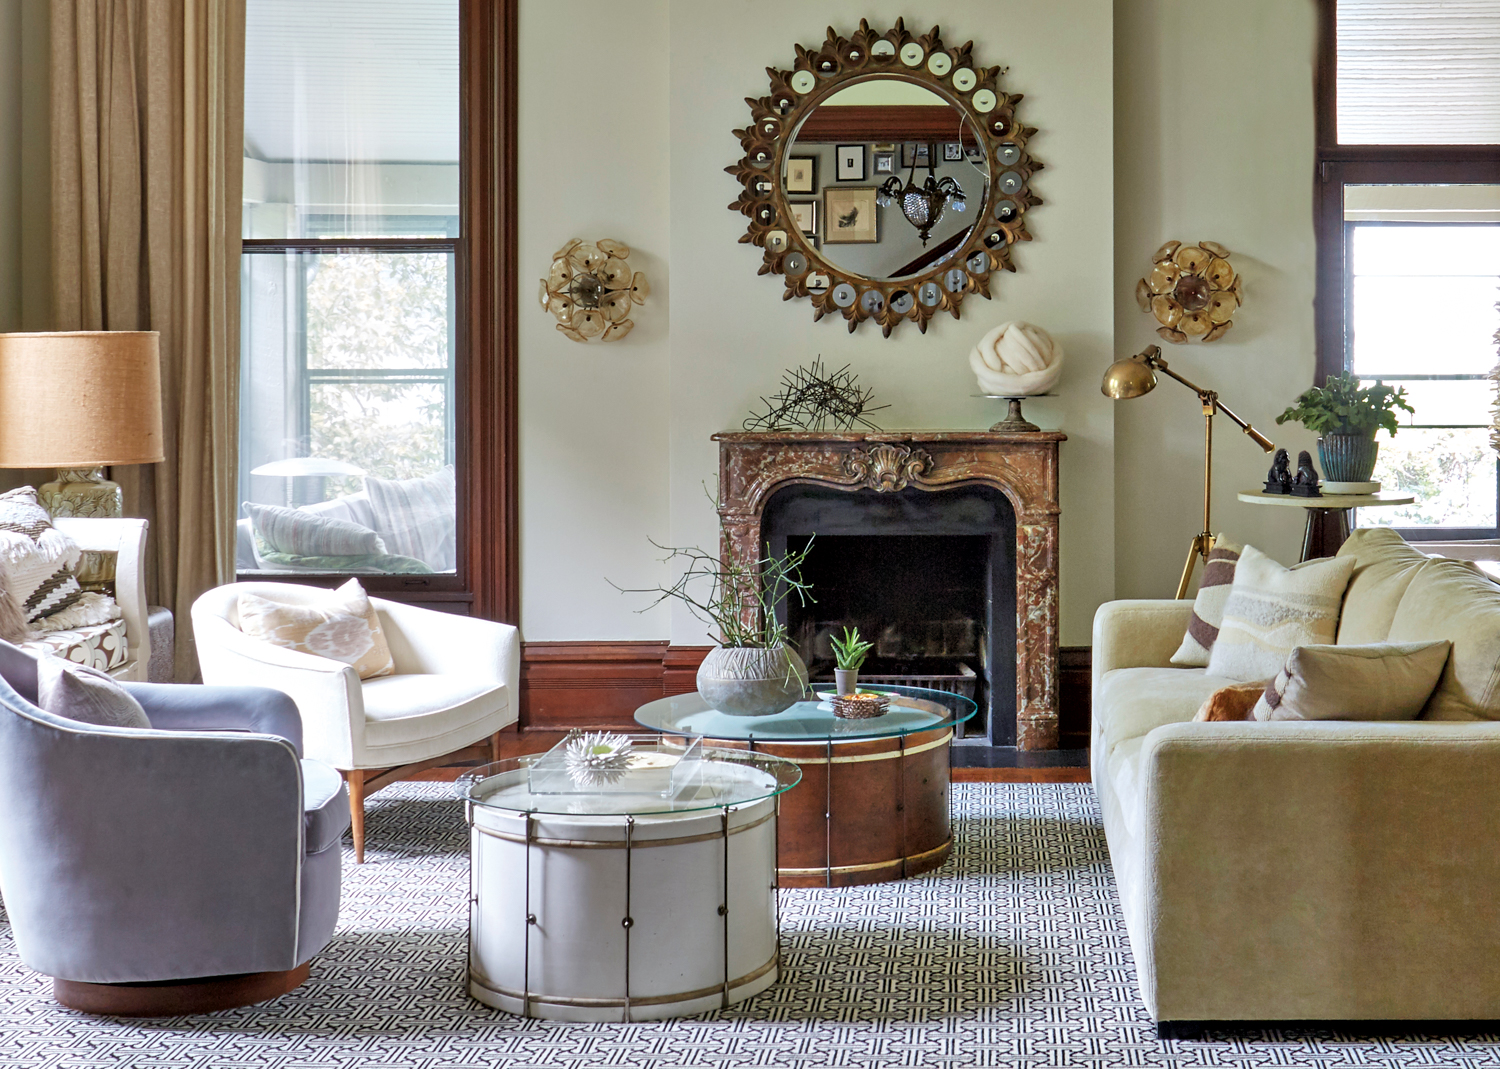 Living room with circular coffee tables, ornate sunburst mirror and a stone fireplace